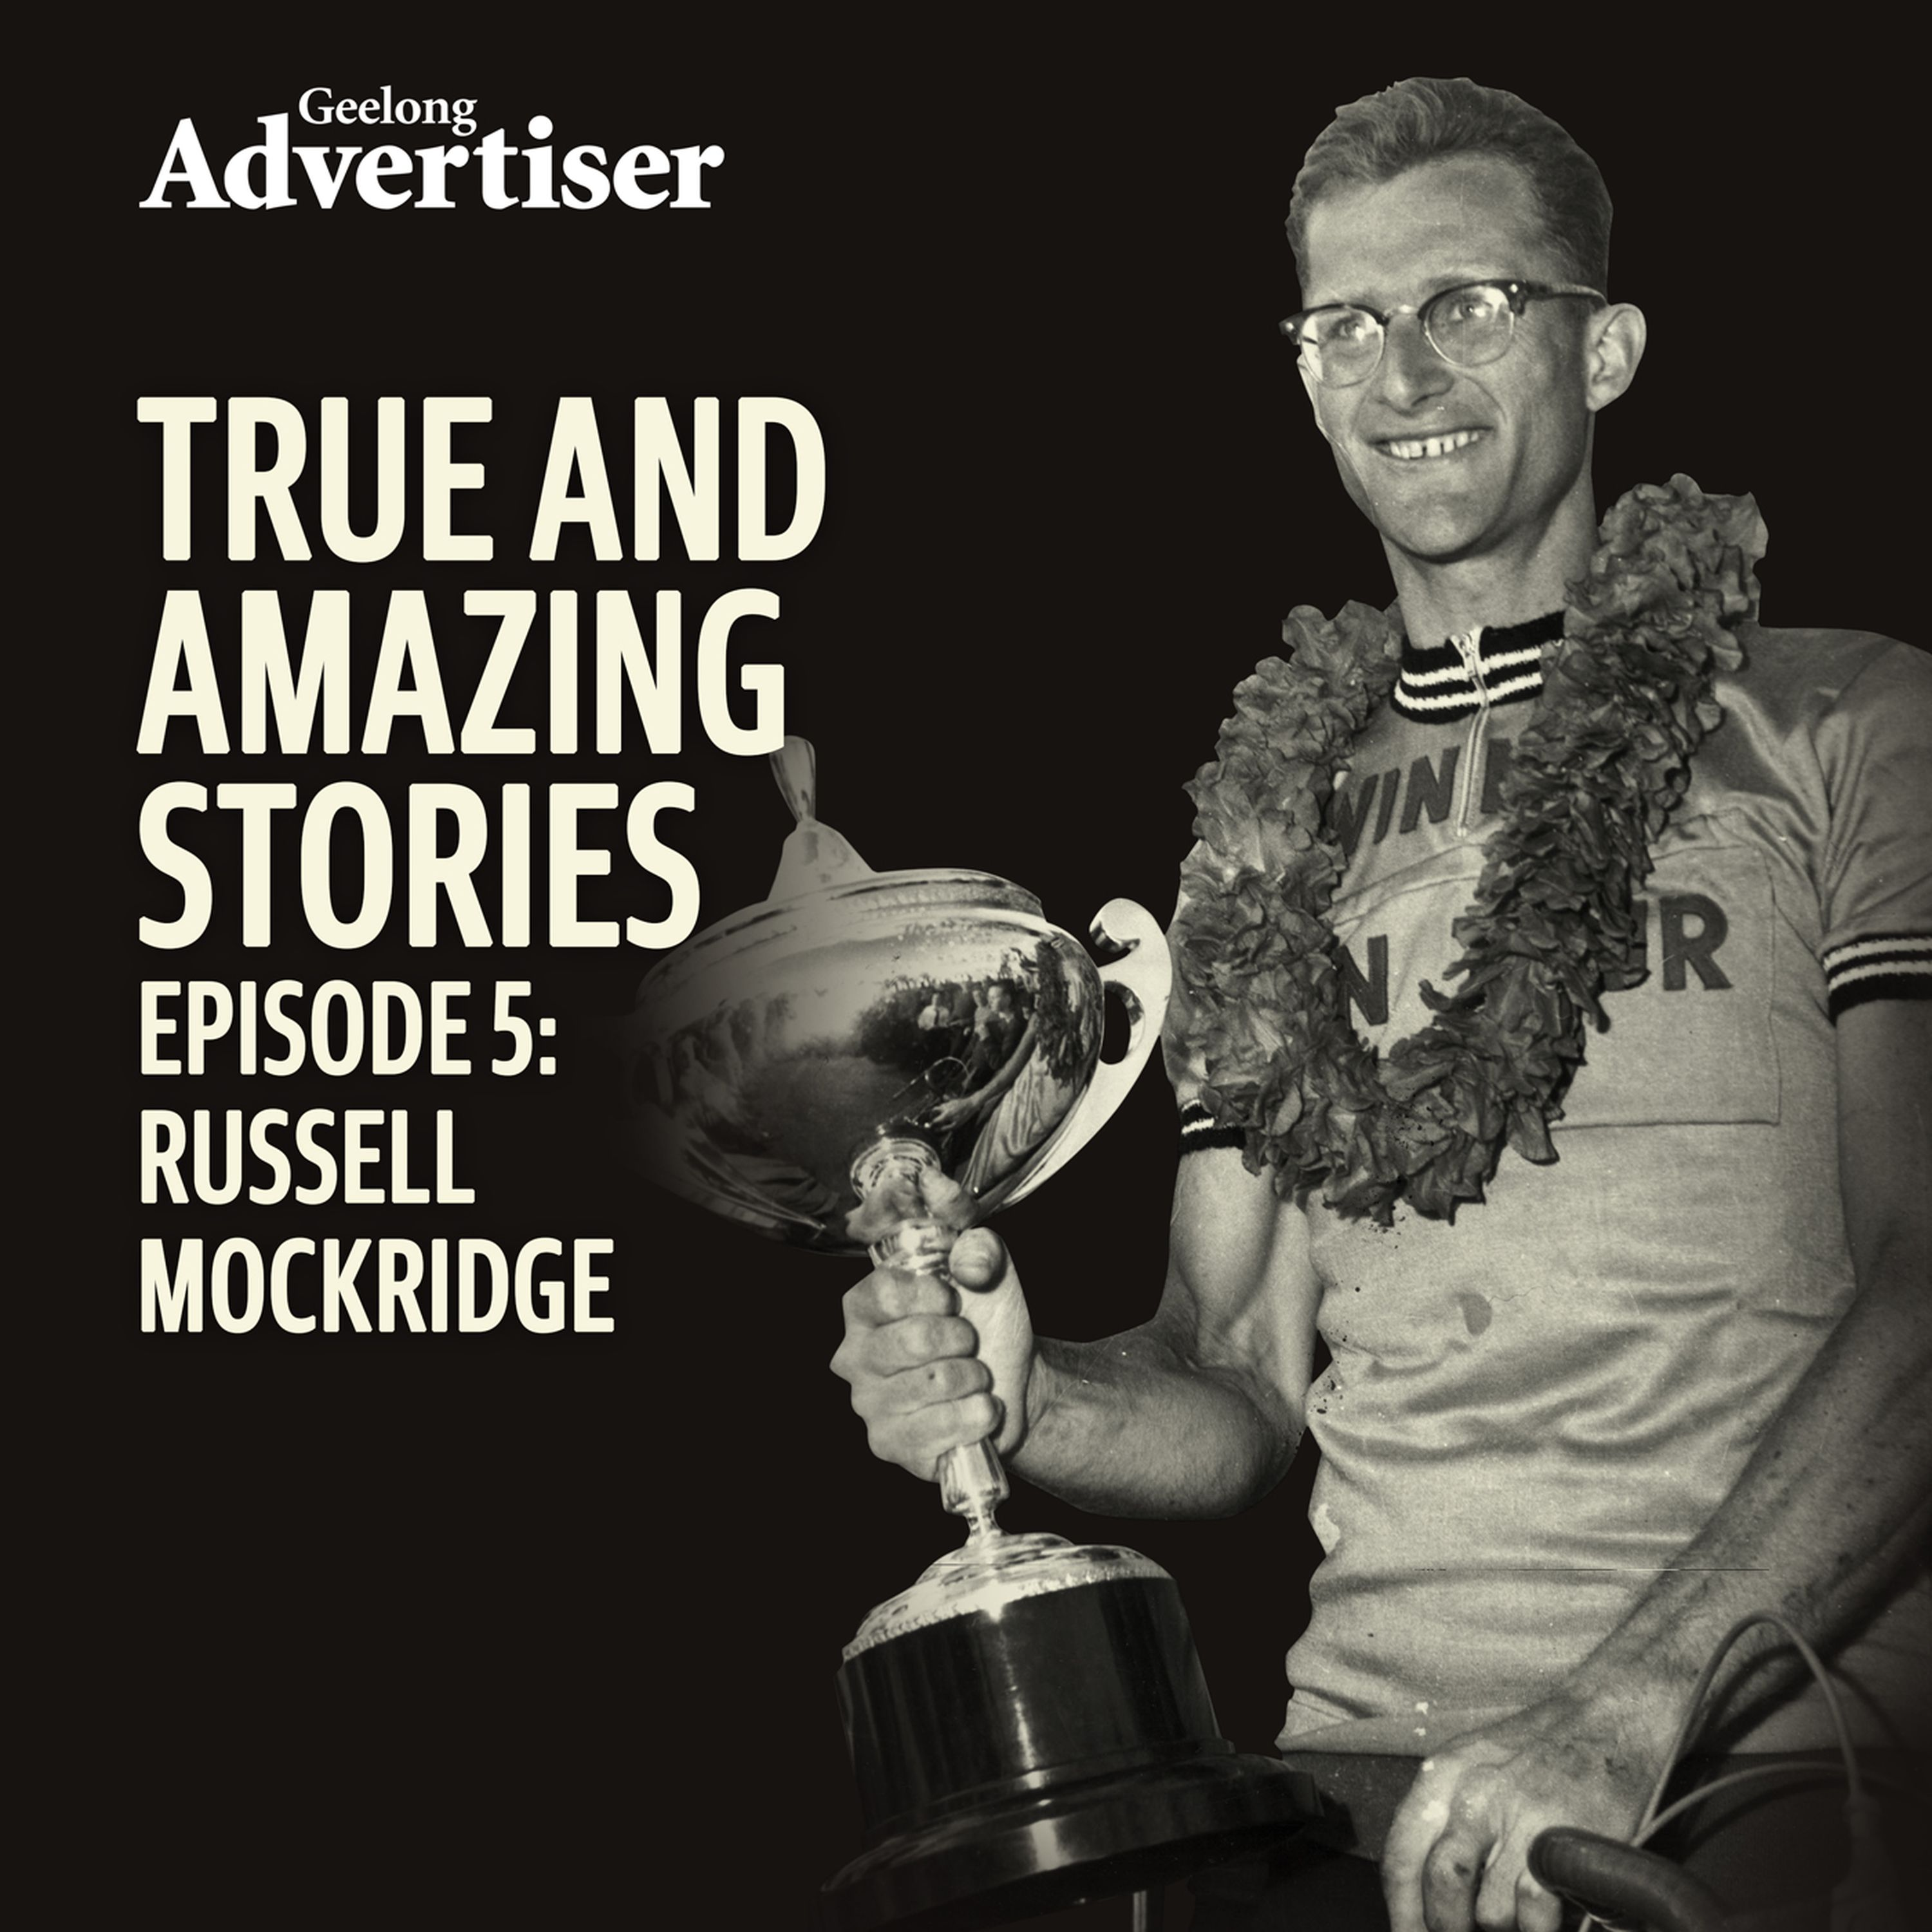 True and Amazing Stories Episode 5: Russell Mockridge